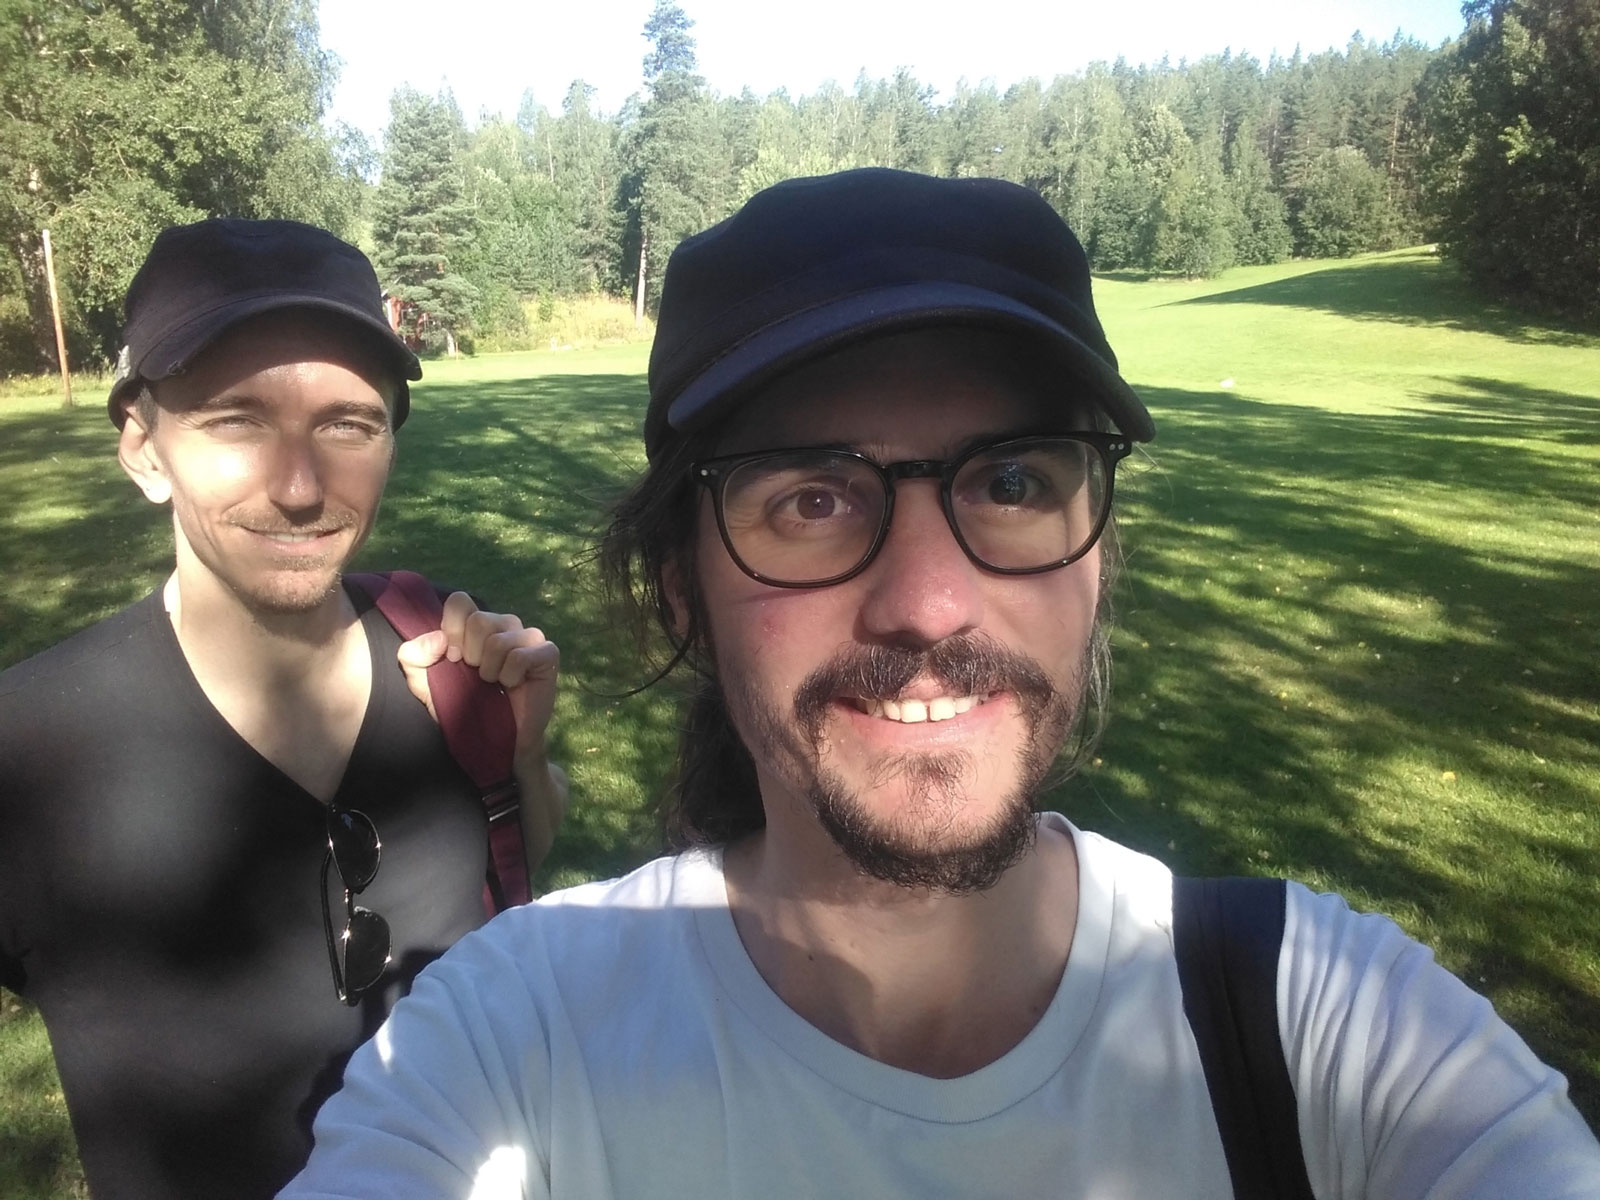 A selfie of Unfold Stories' Riccardo (on the left) and Lucio (on the right). Both are smiling widely on a sunny day.